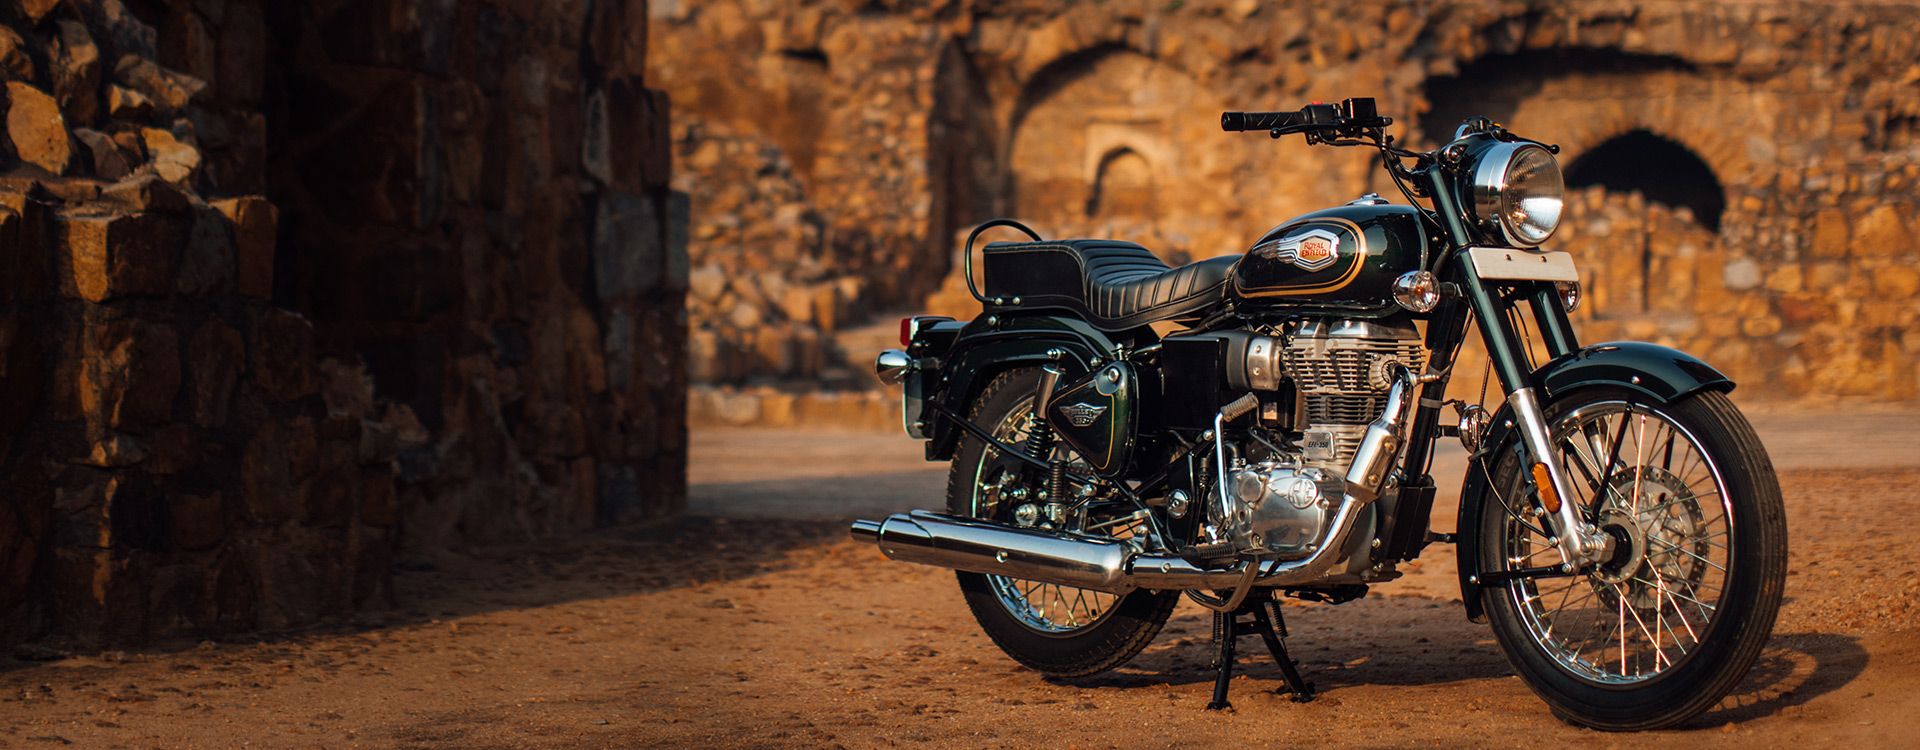 Bullet 350, Specifications, Reviews, Gallery. Royal Enfield